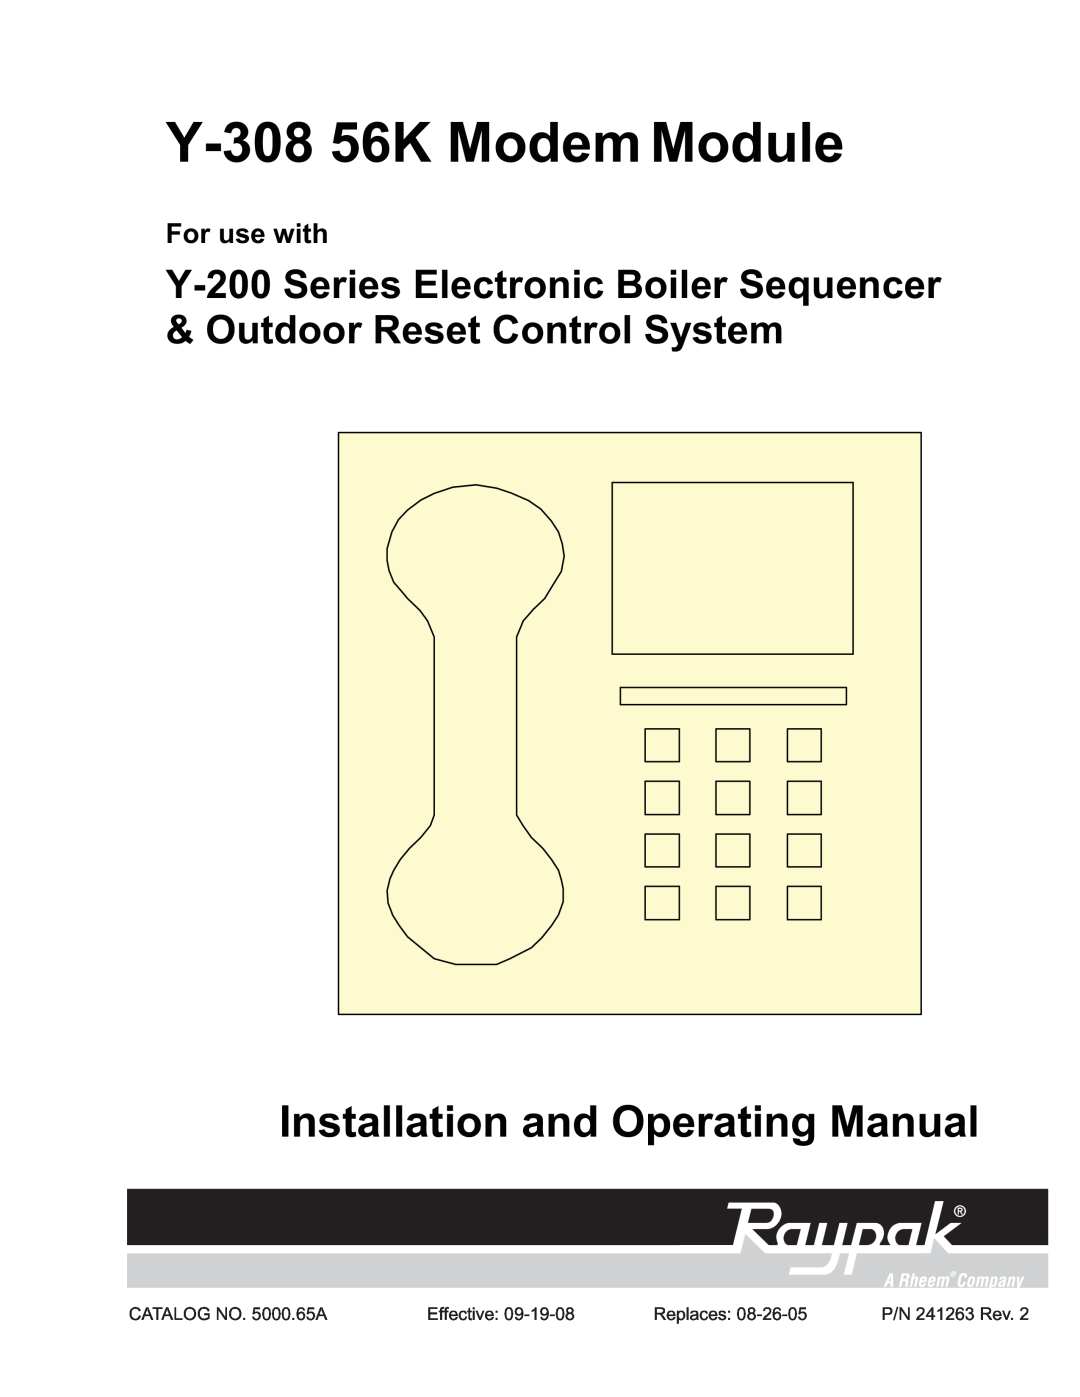 Raypak manual Y-308 56K Modem Module, Installation and Operating Manual, For use with, CATALOG NO. 5000.65A, Effective 